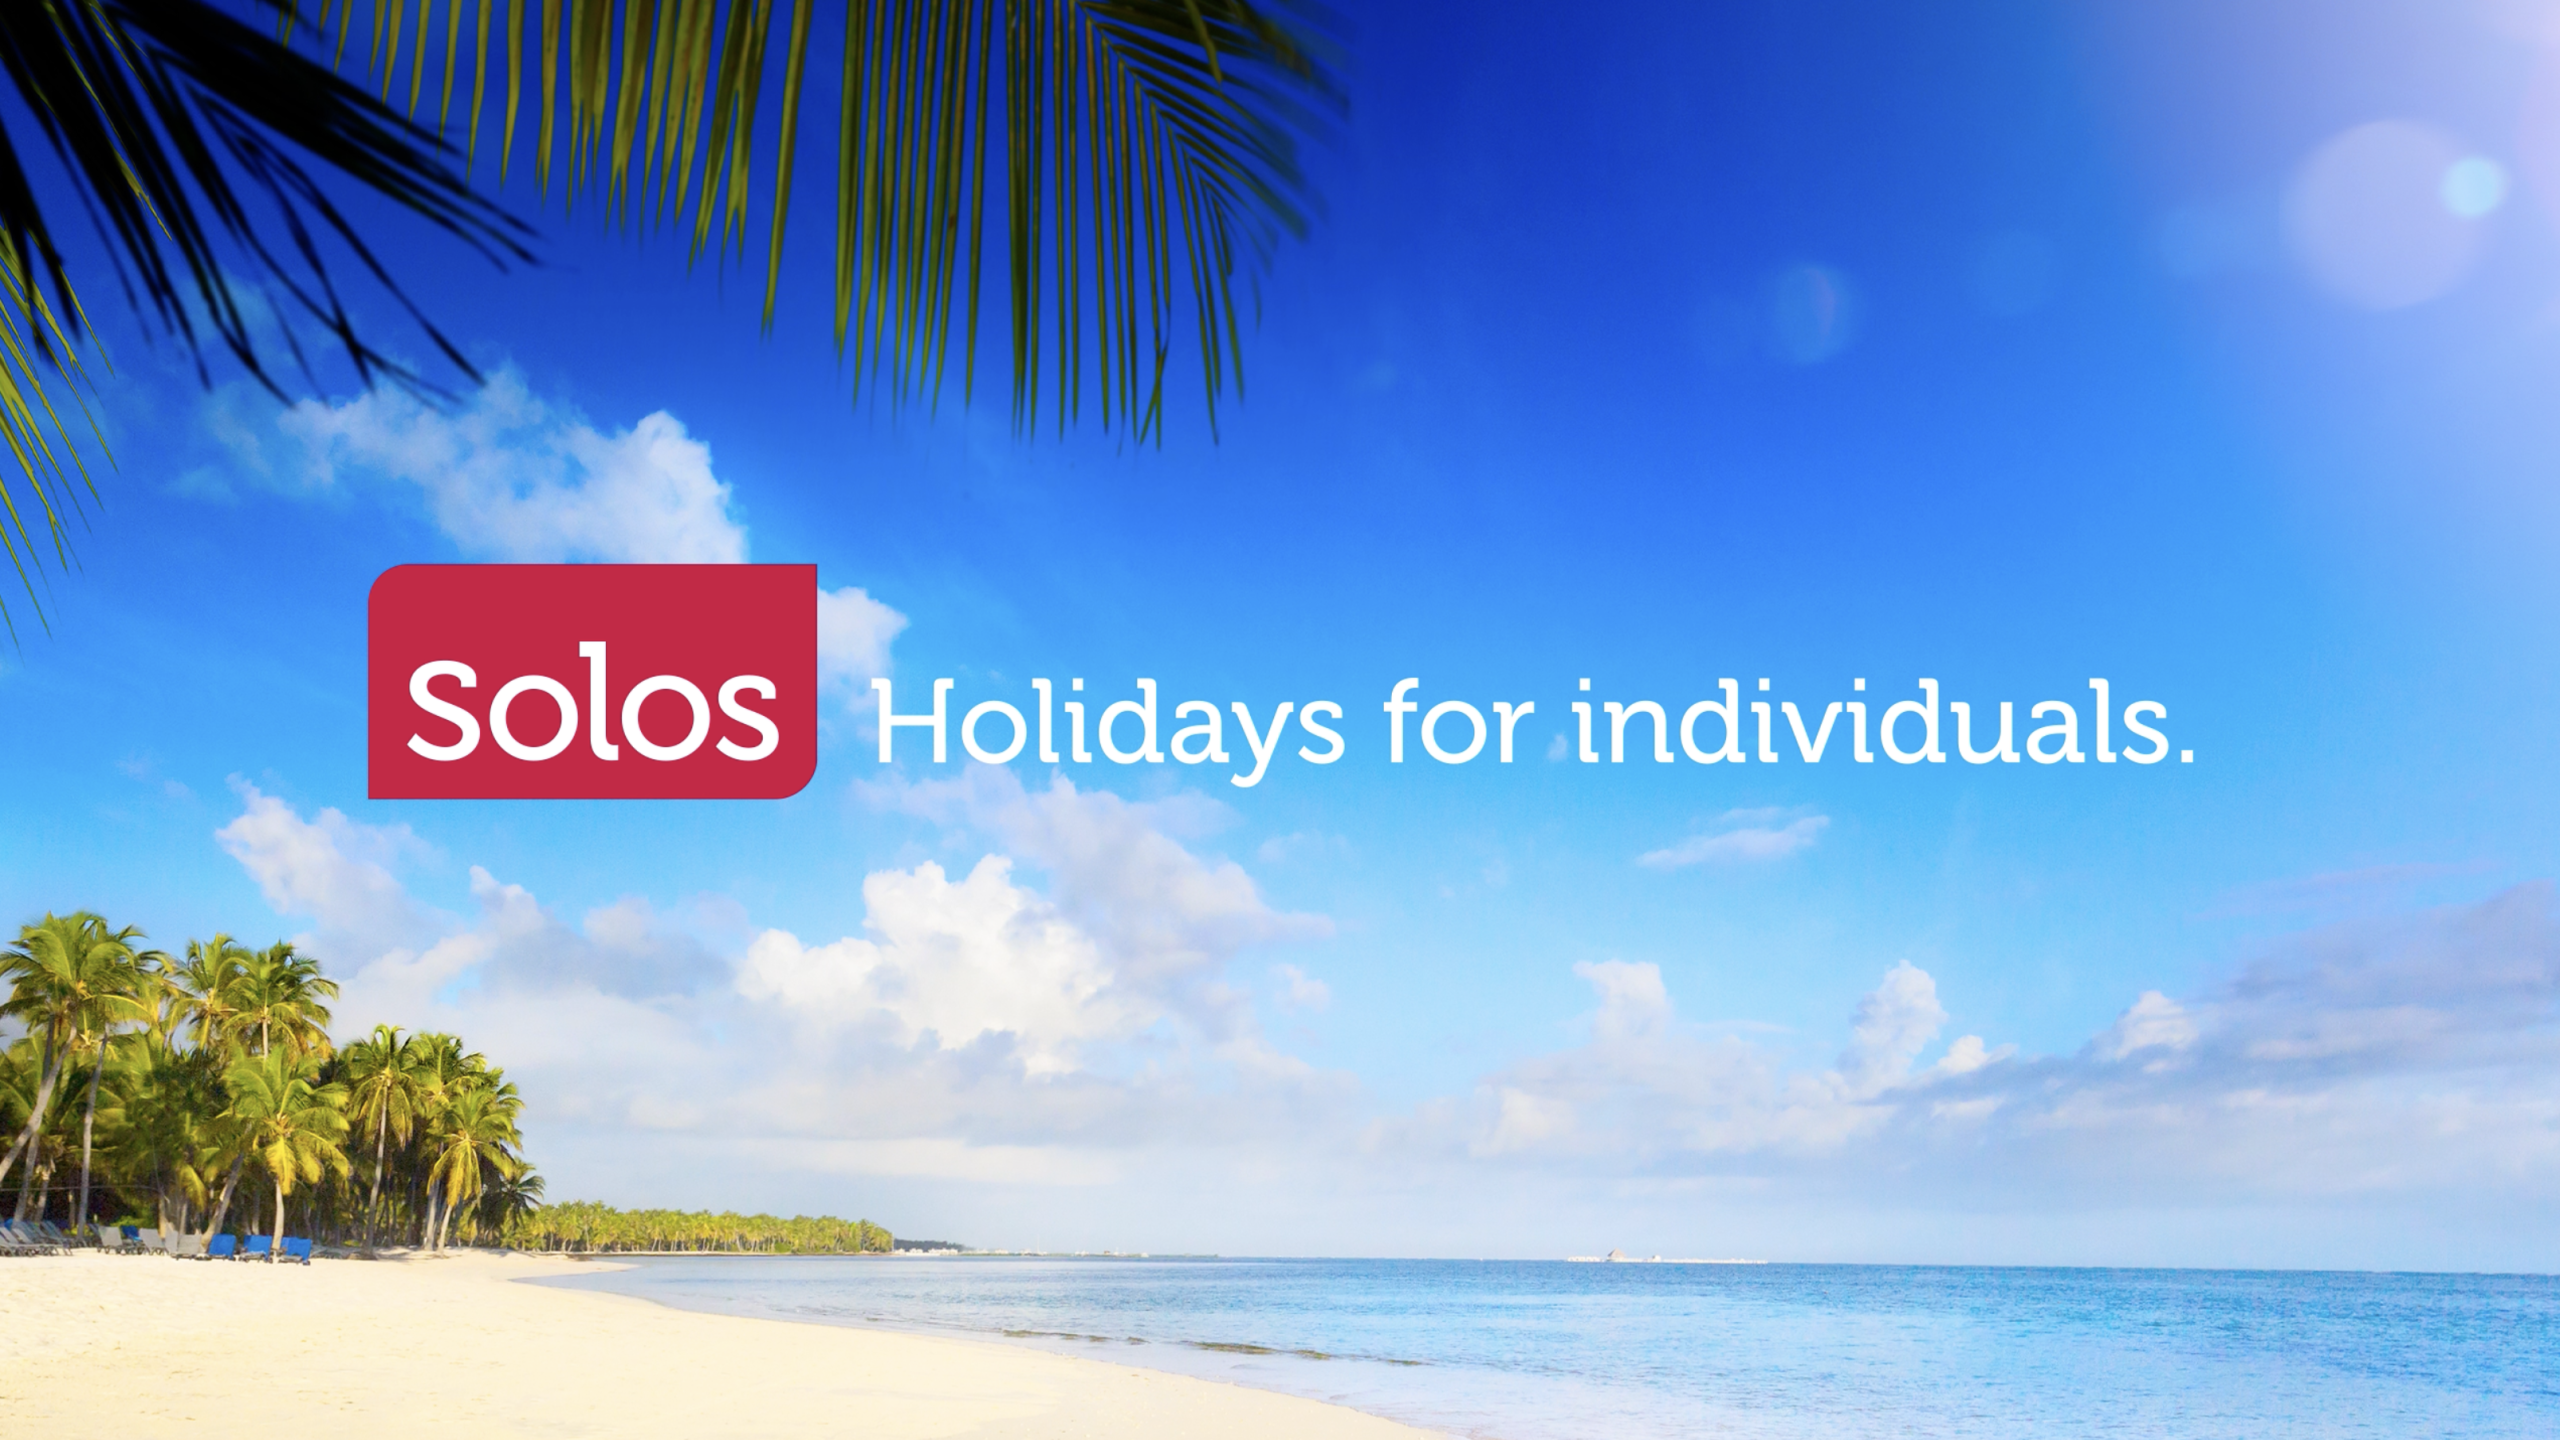 Solos Holidays for Individuals